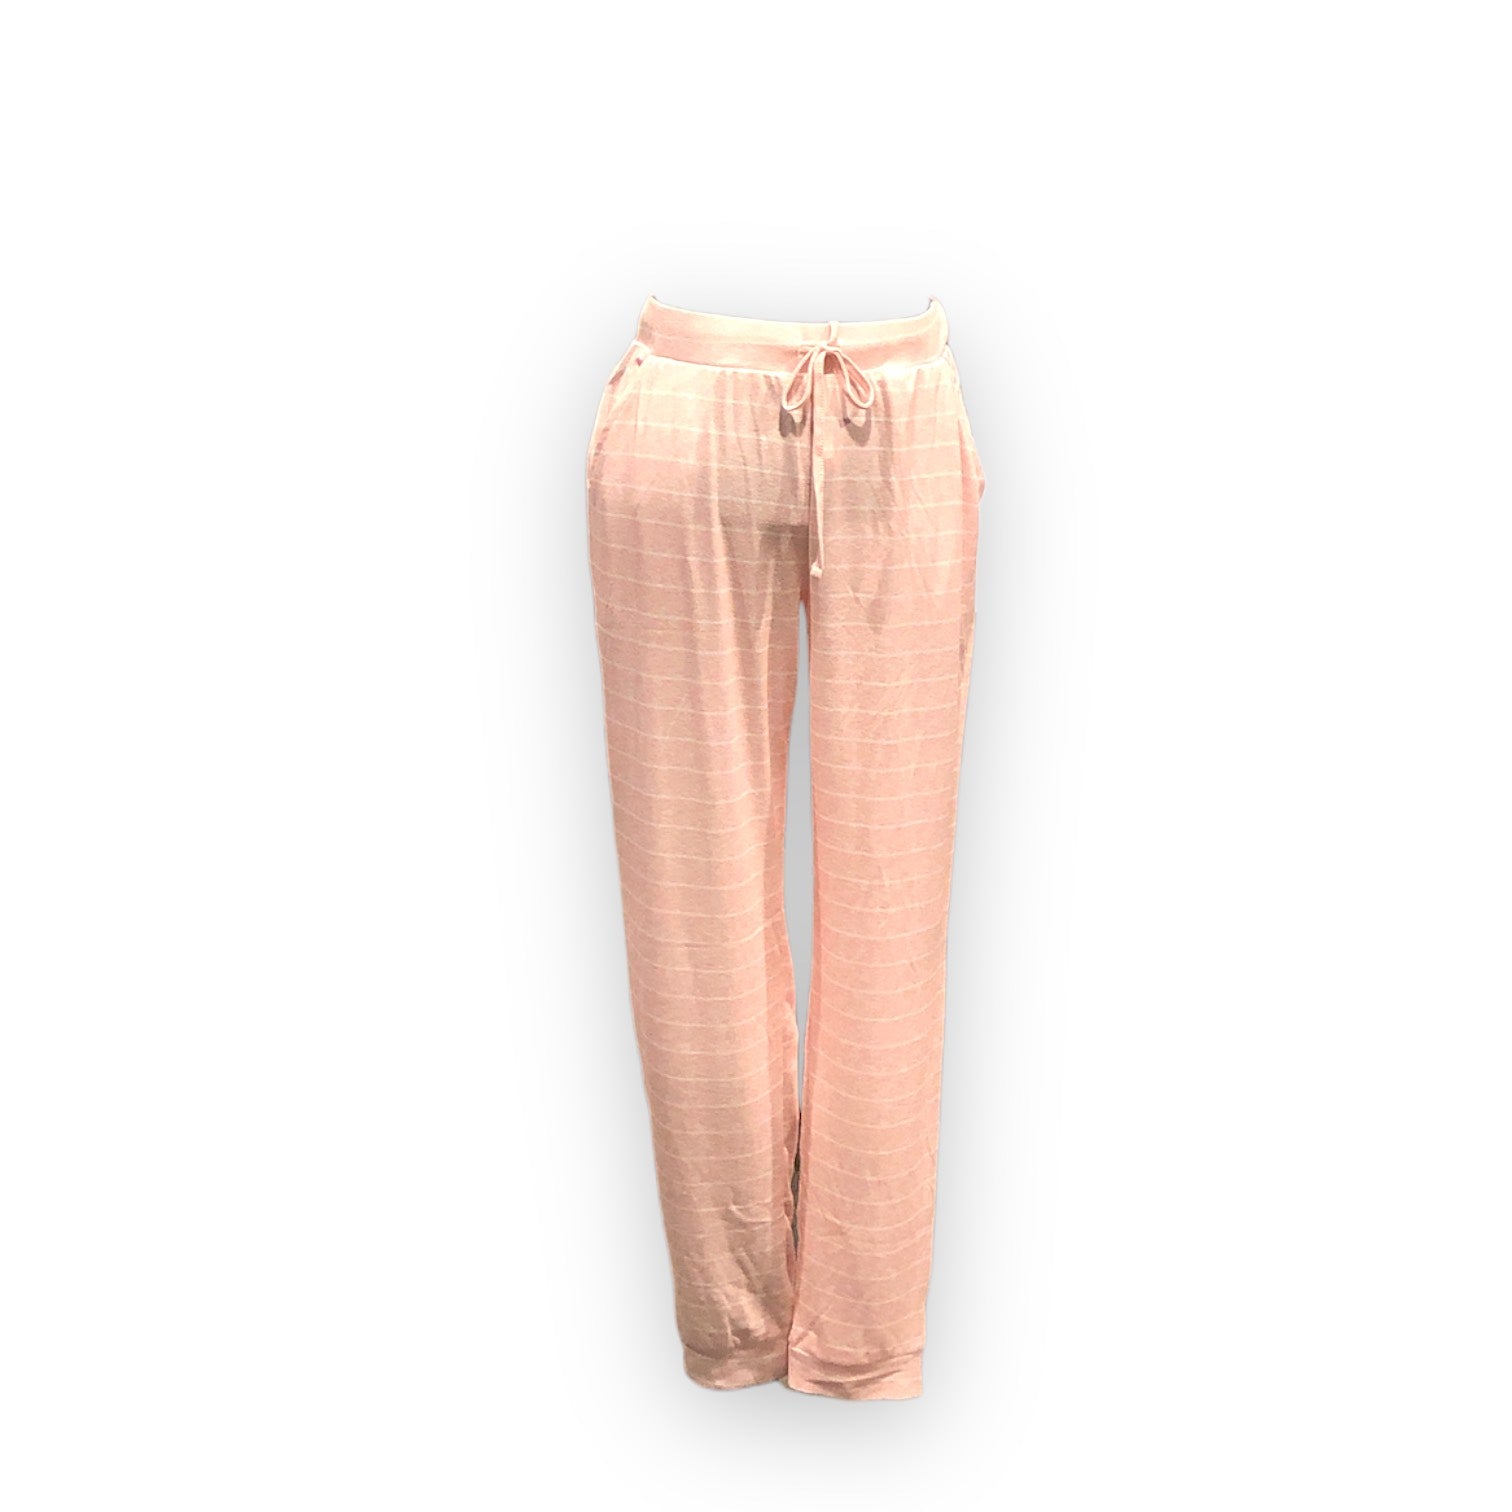 Women's Hacci Sweater Knit Long Jogger Sleep Pants with Pockets